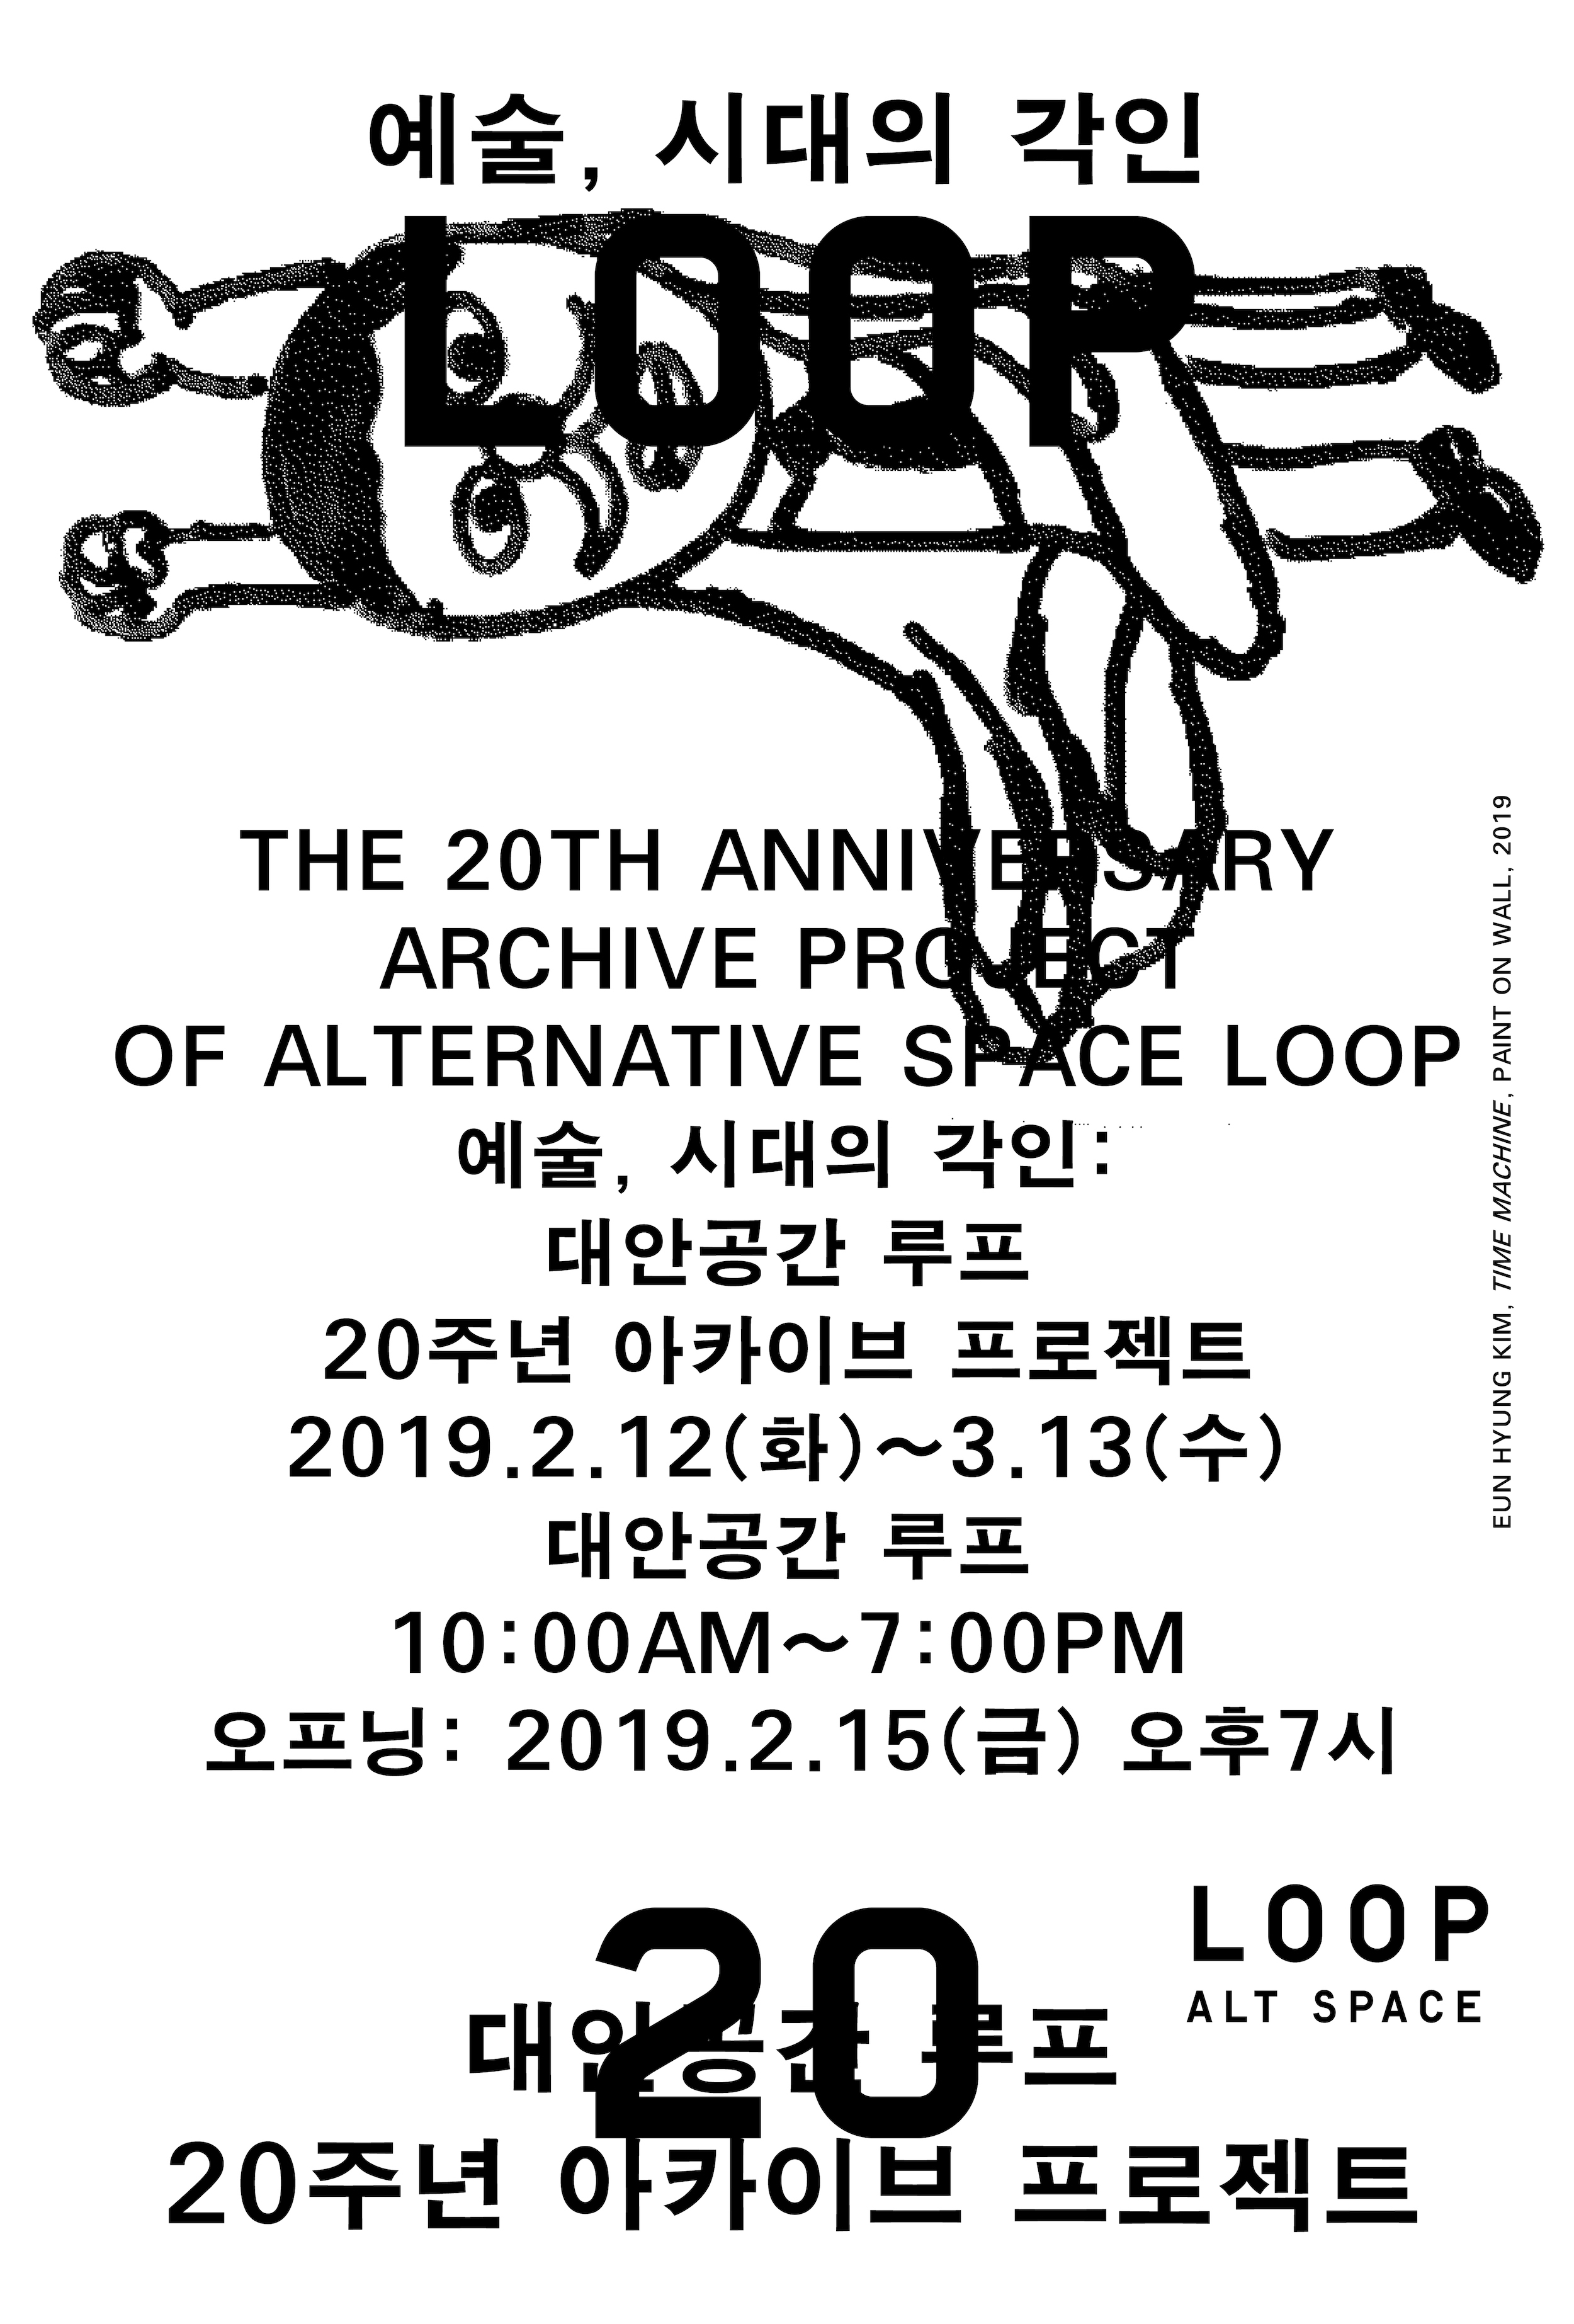 The 20th Anniversary Archive Project of Alternative Space LOOP